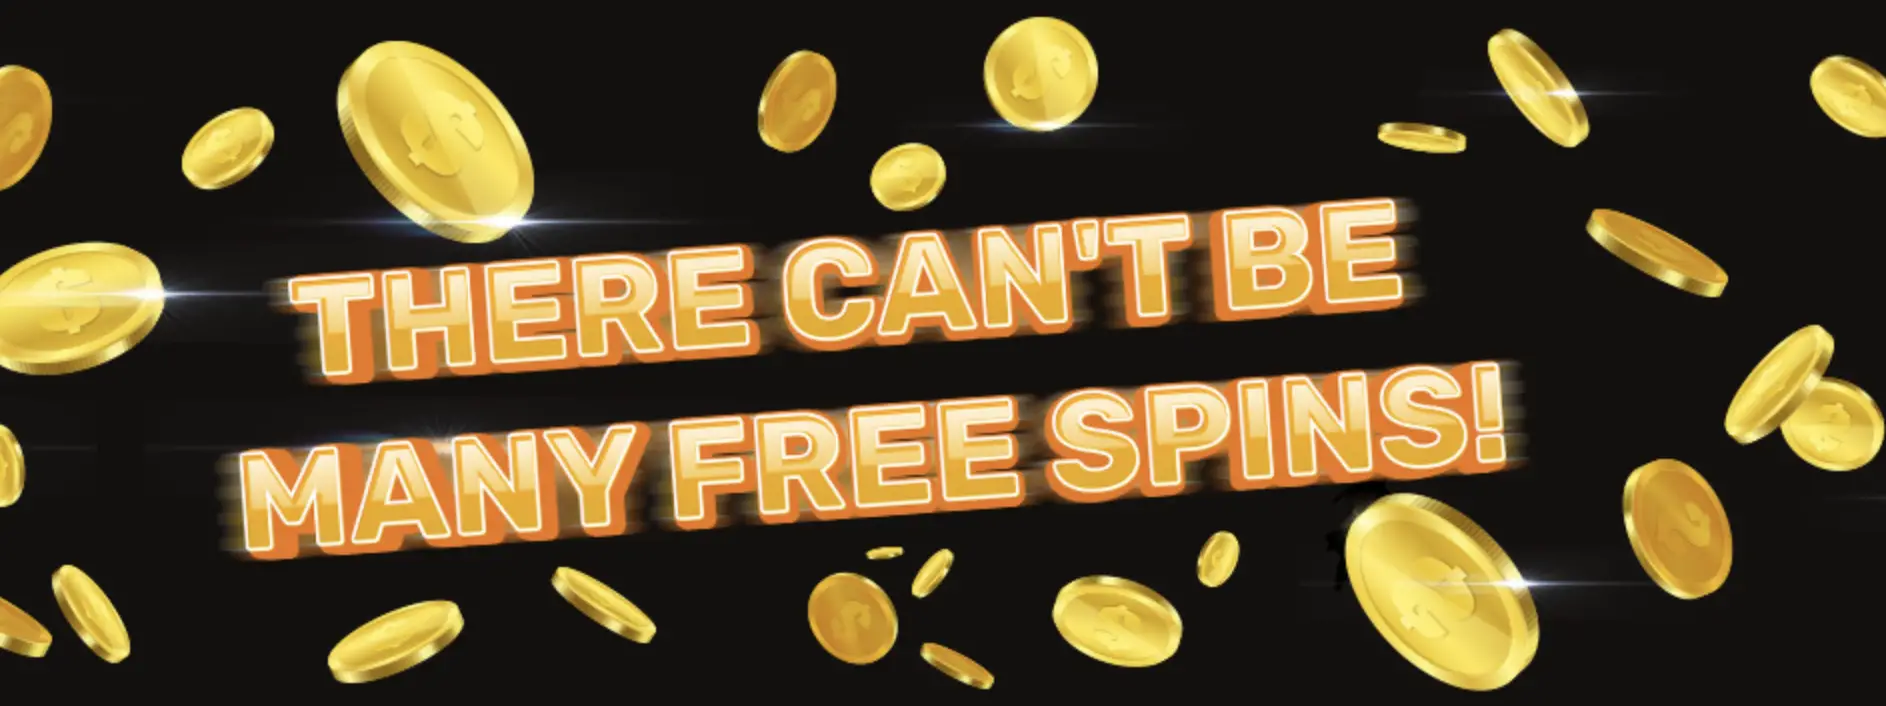 Free Credit Casinos Malaysia: Risk-Free Gambling with Welcome Bonuses and Extra Money